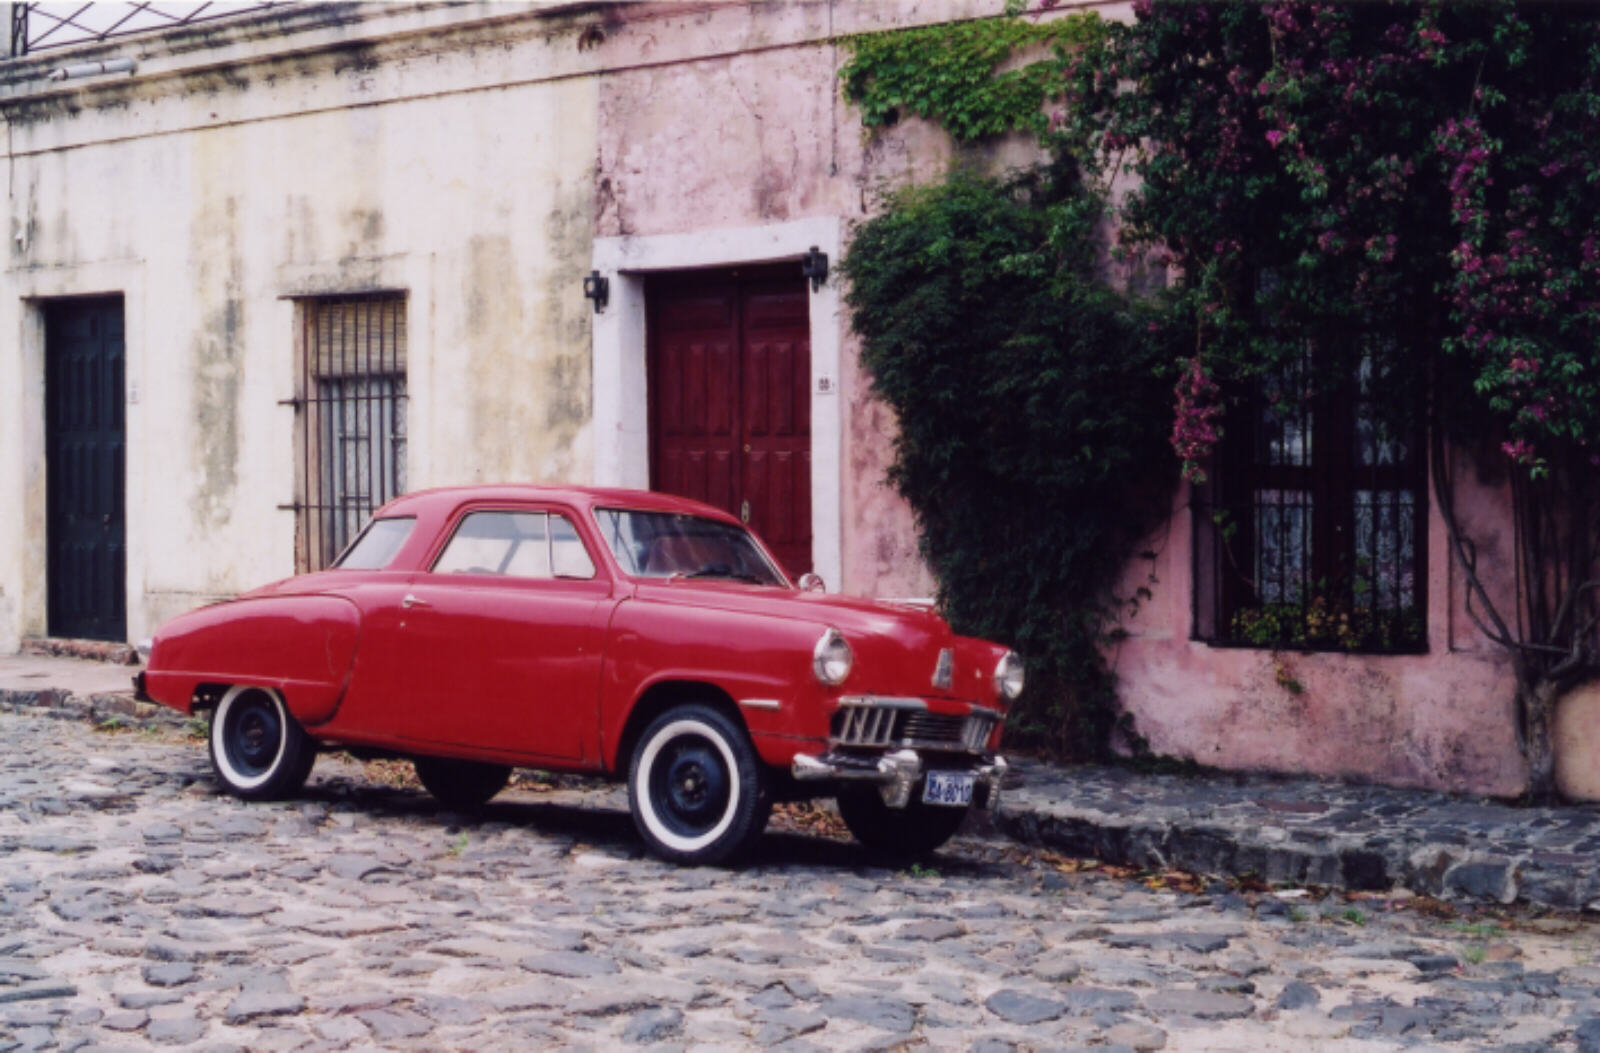 An old car in Real street, Colonia, Uruguay